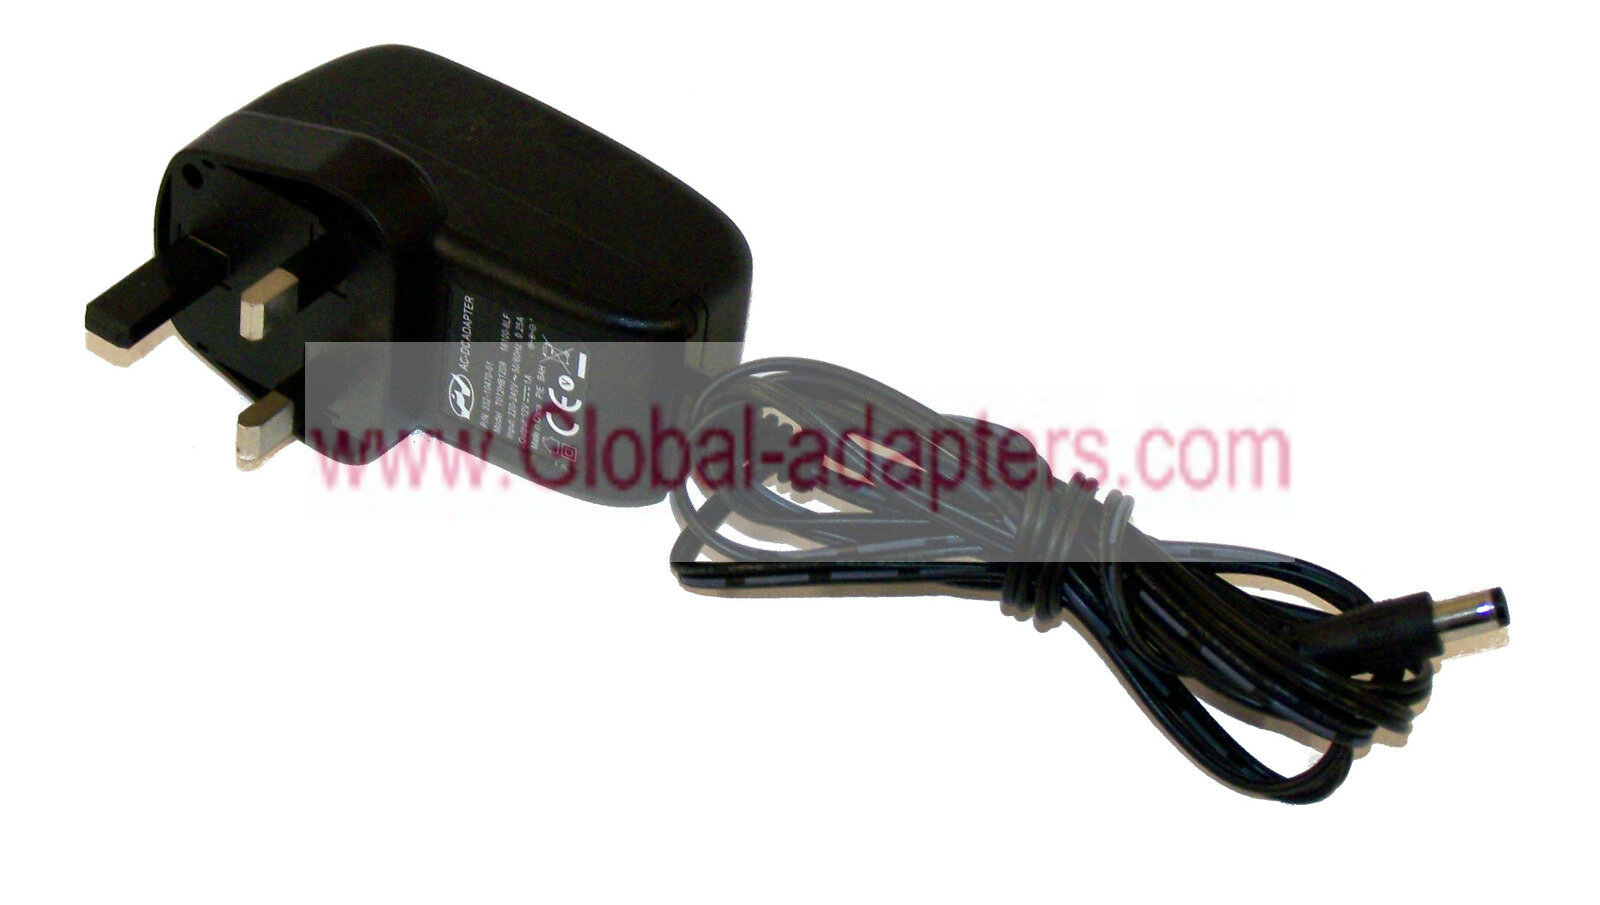 NEW PV 332-10470-01 12VDC 1A AC Adapter with Barrel Connector UK plug - Click Image to Close